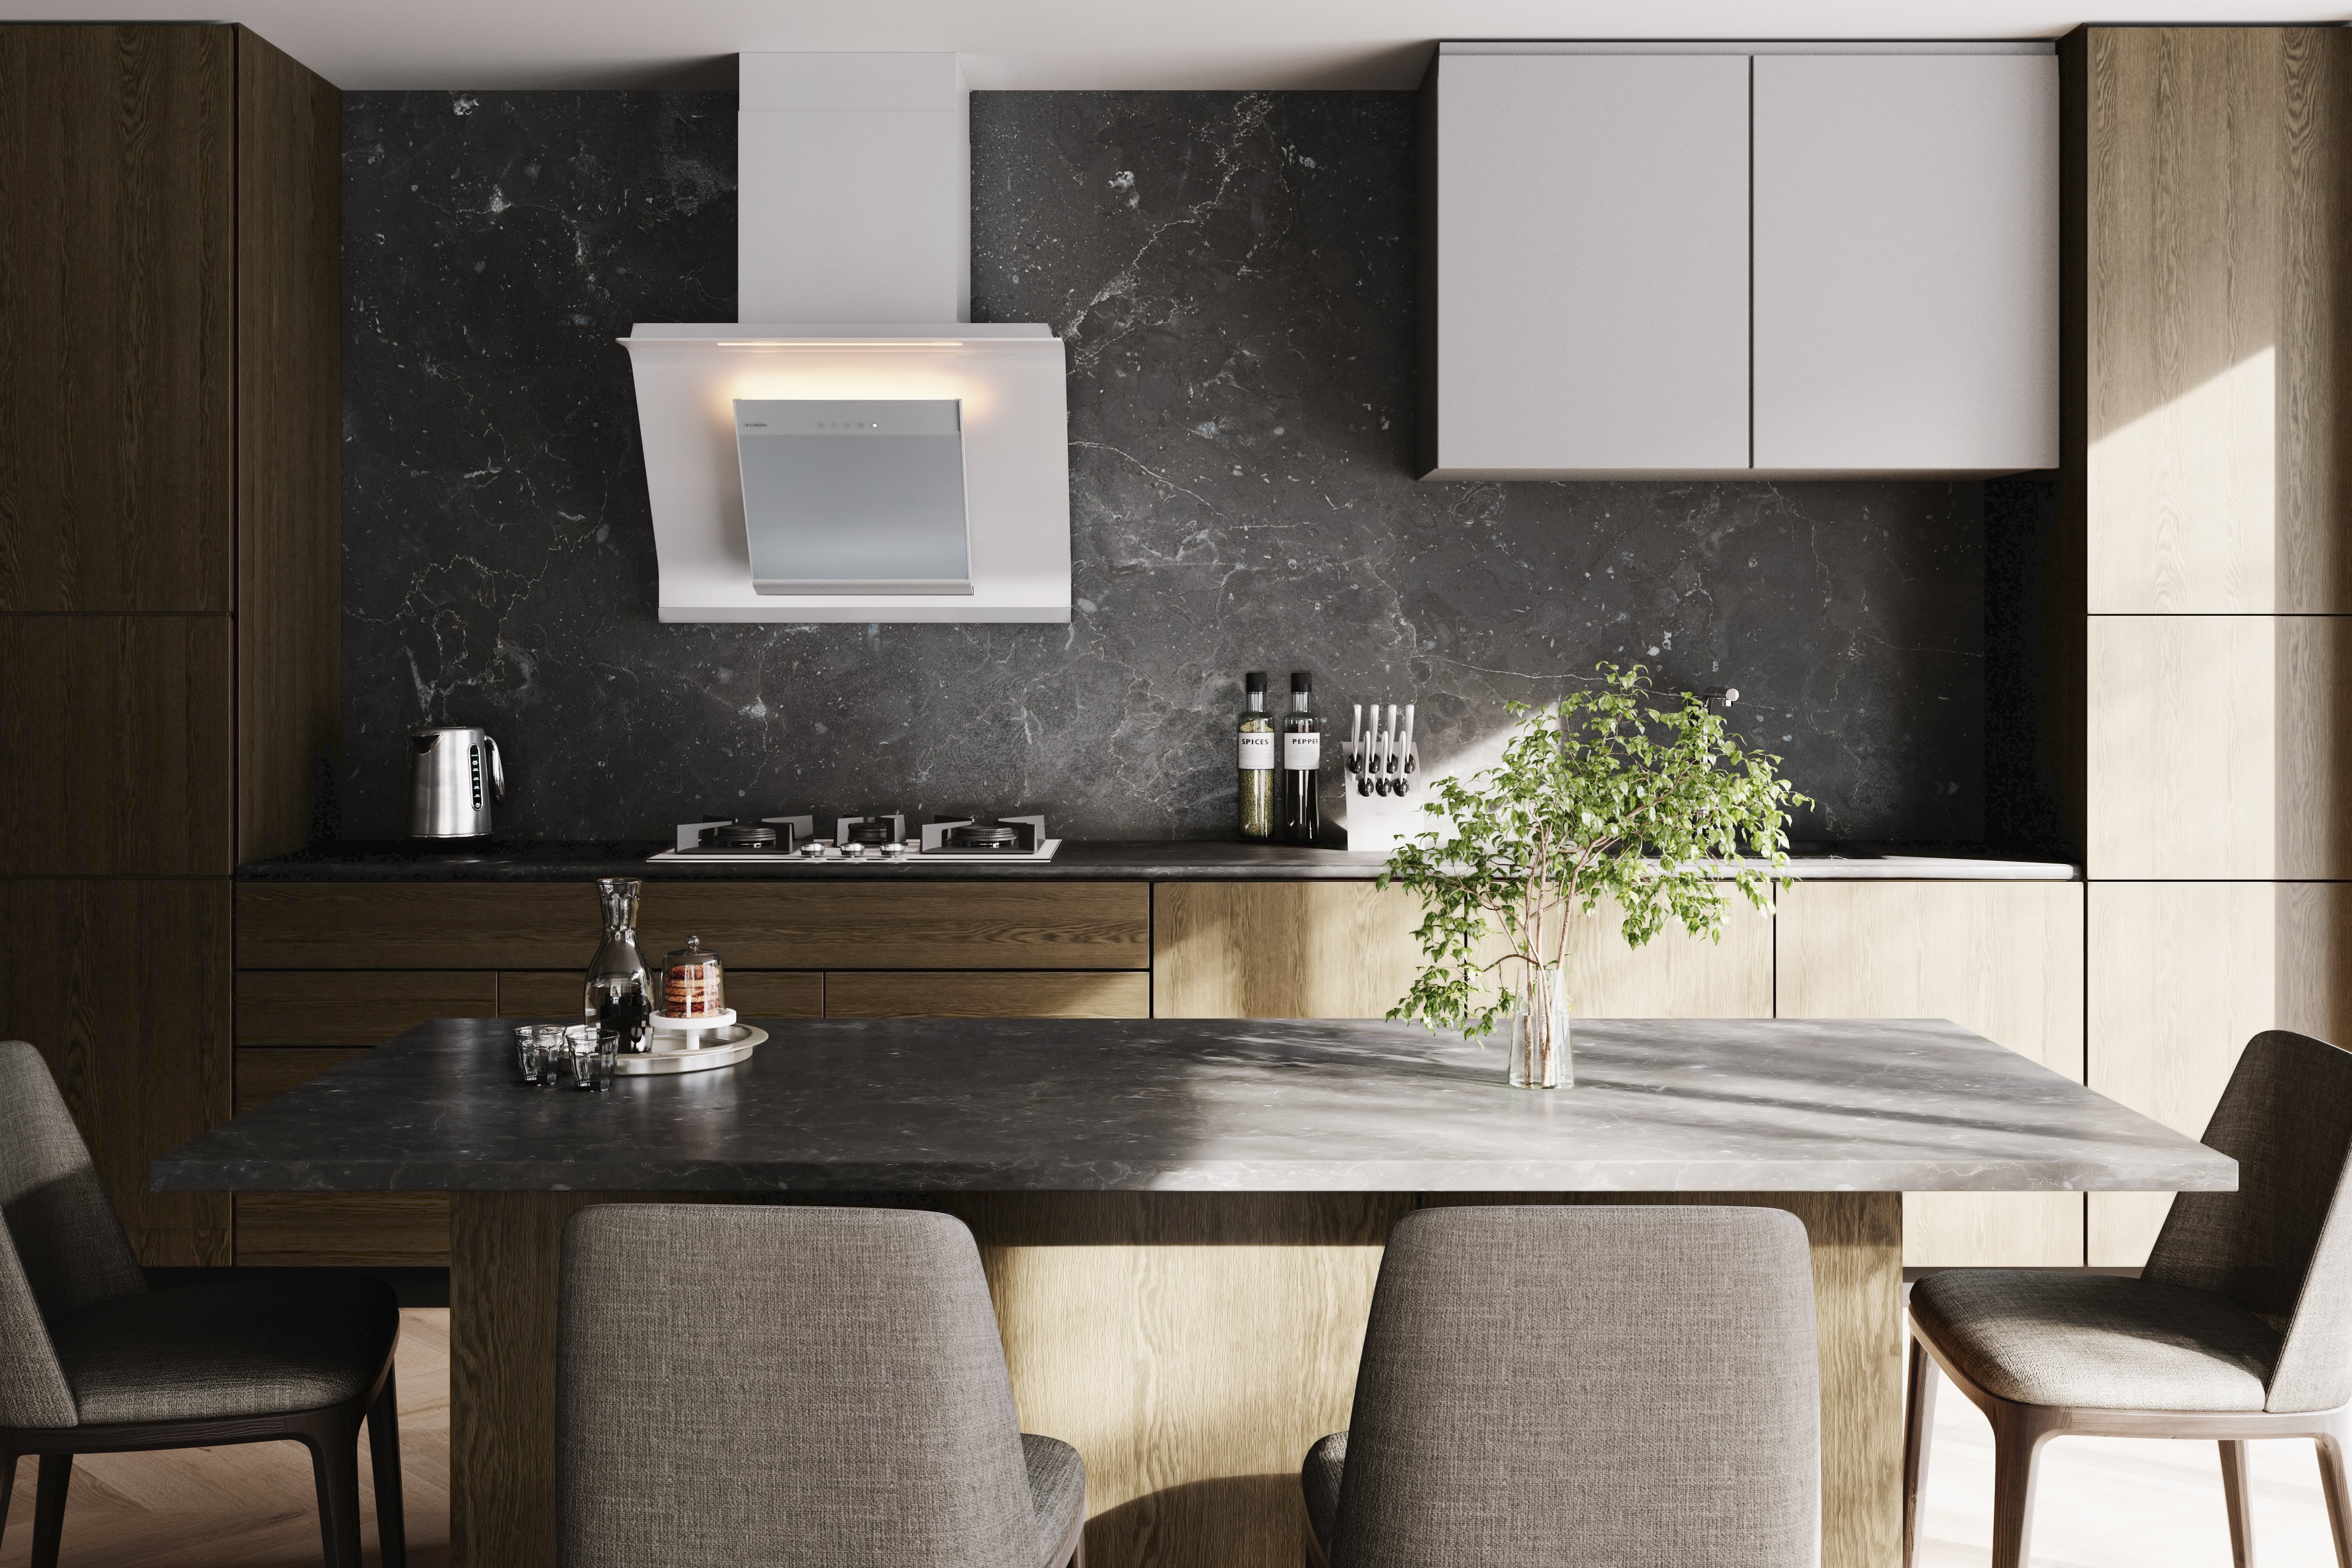 Find the best cooker hoods with functional beauty for your home